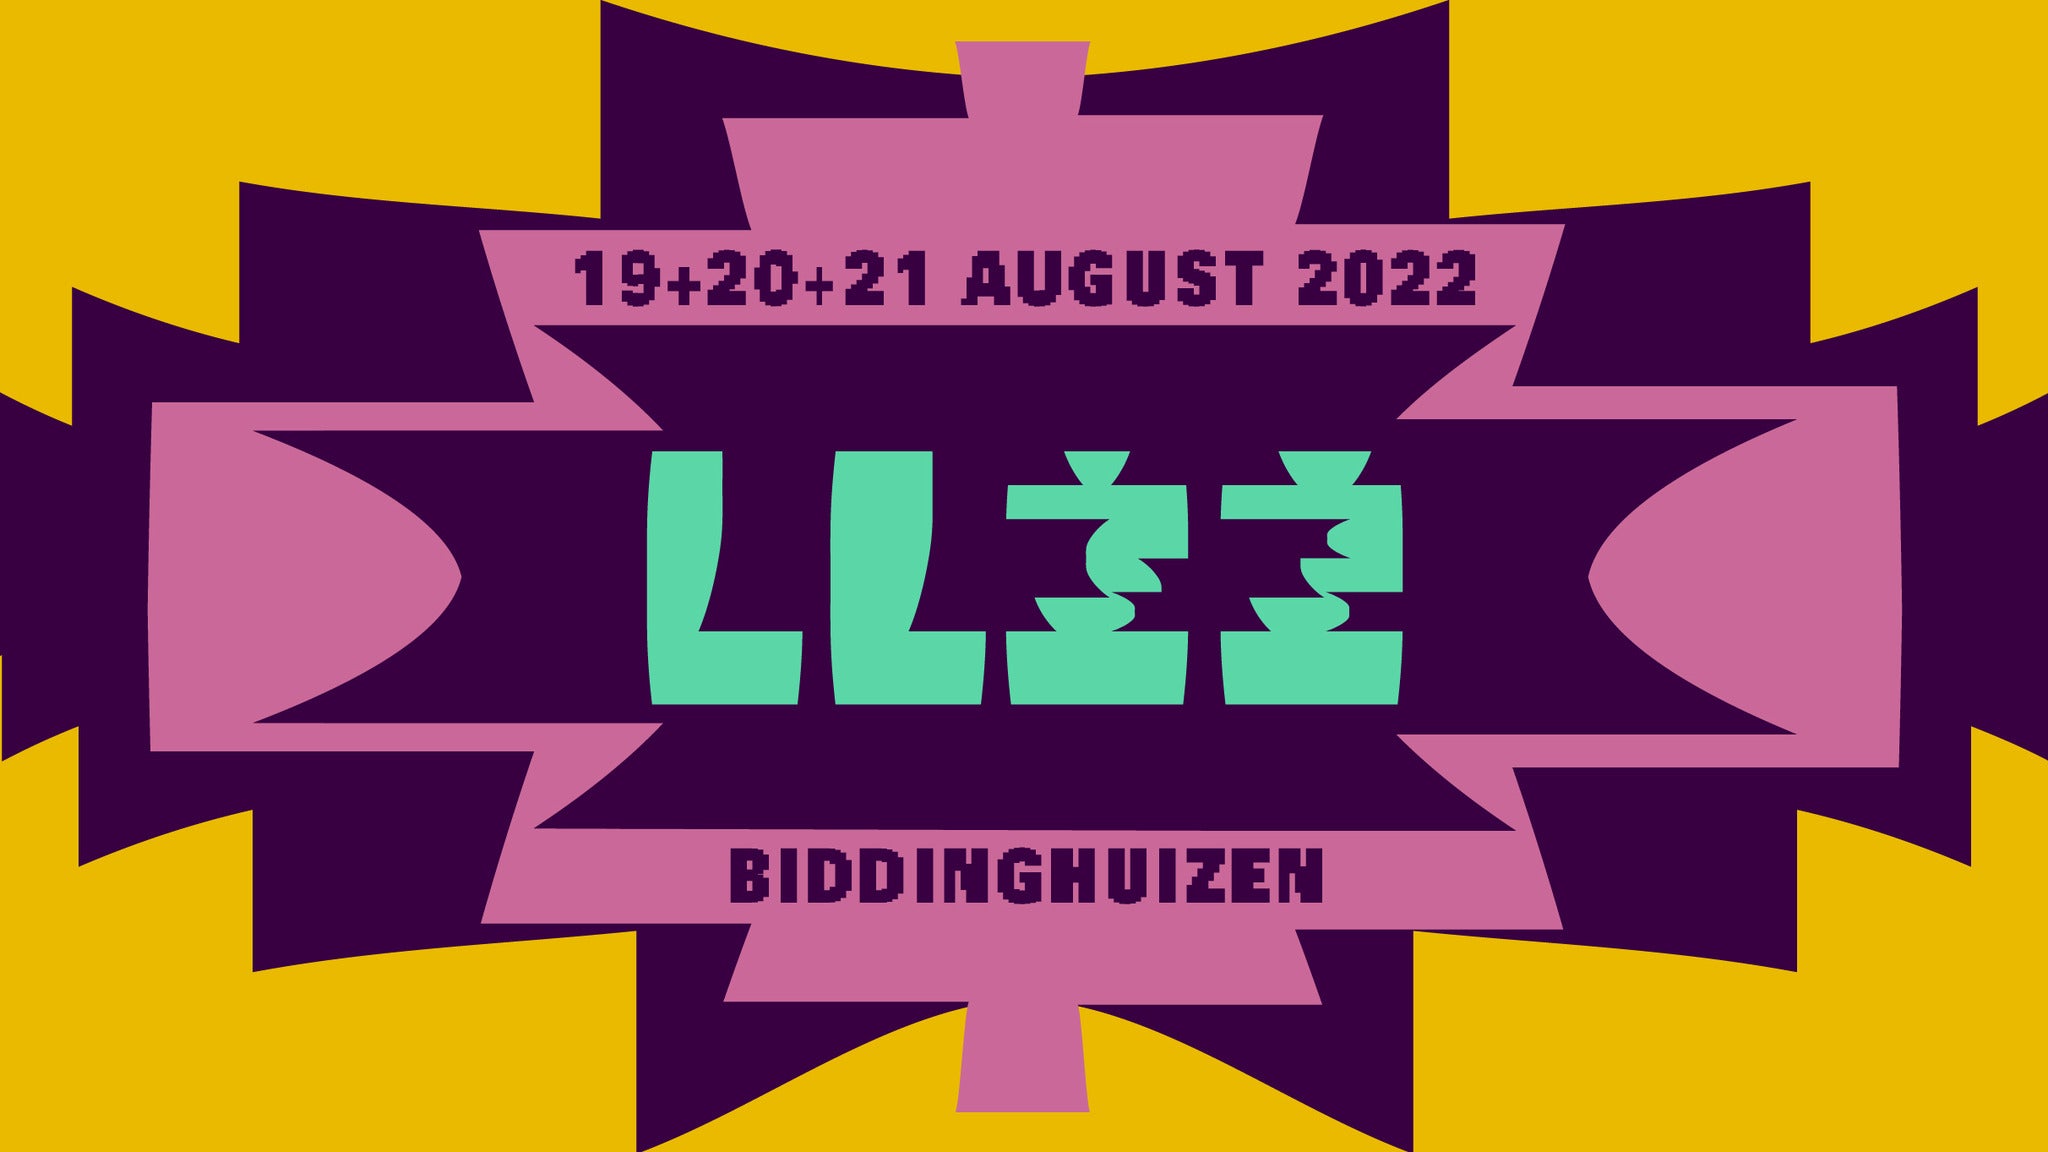 A Campingflight to Lowlands Paradise 2022